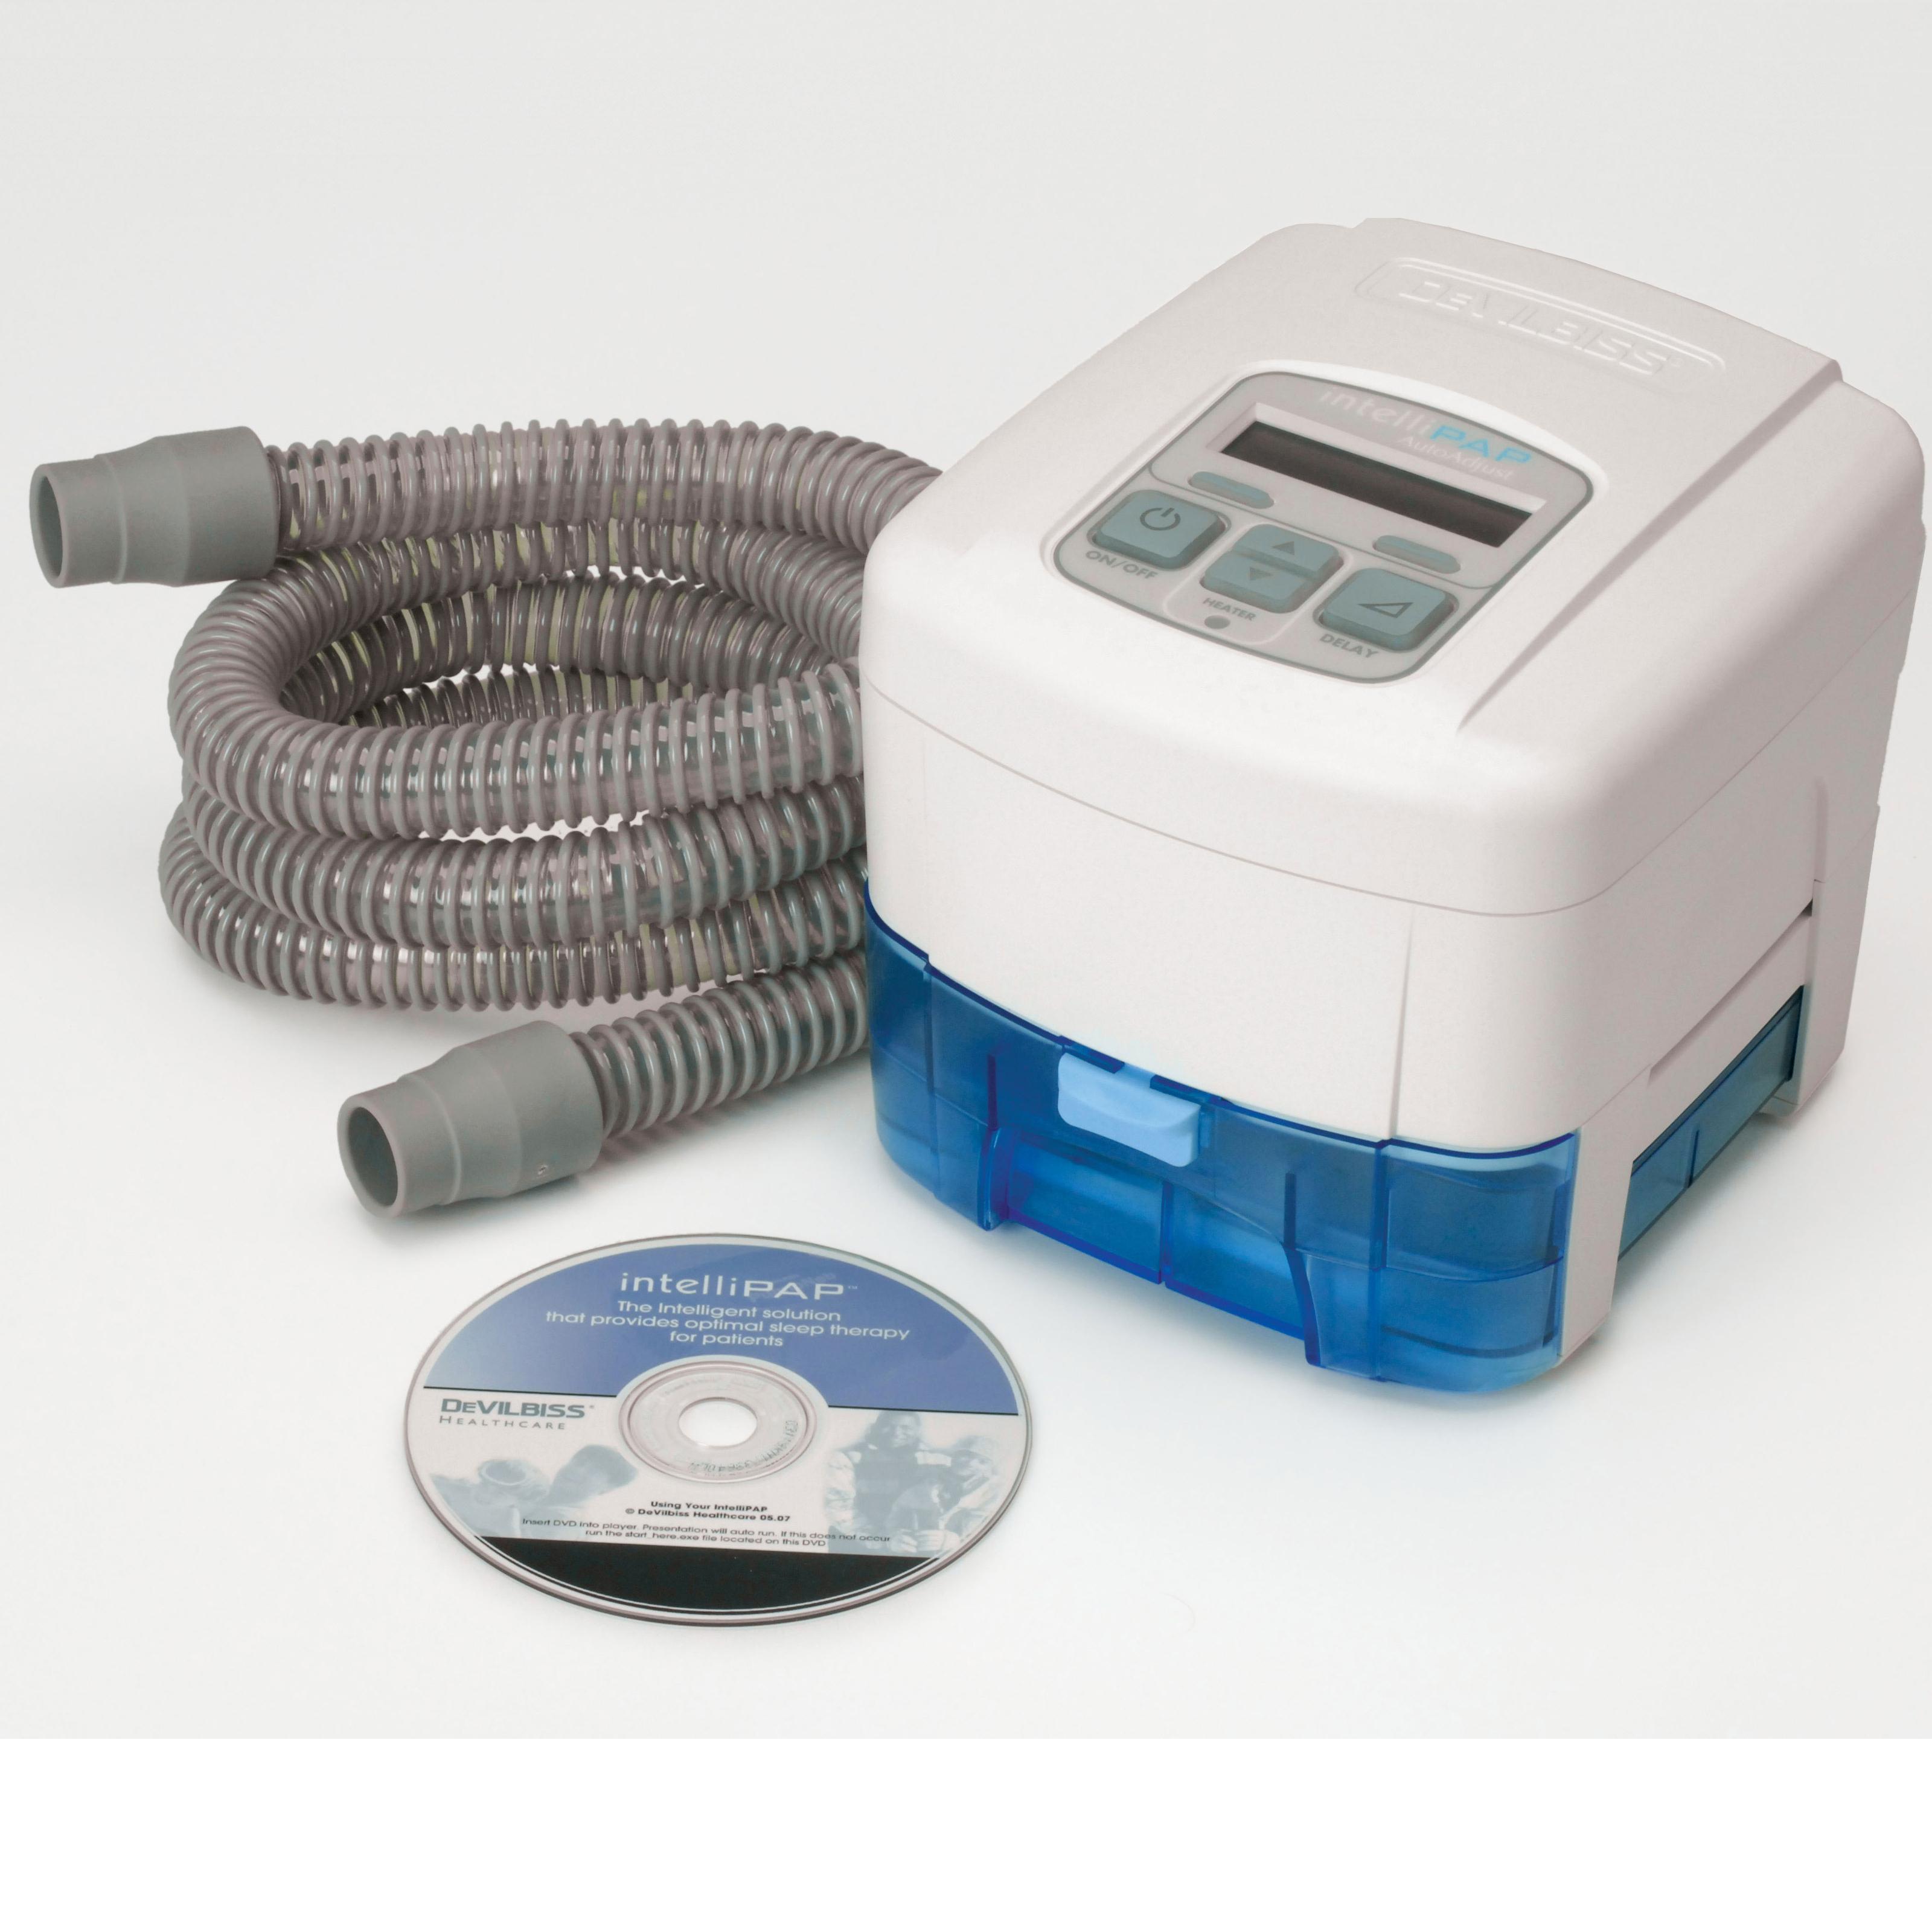 DeVilbiss Auto-CPAP : # DV54D-HH IntelliPAP AutoAdjust with Humidifier-/catalog/cpap/devilbiss/InteliPAPauto-04